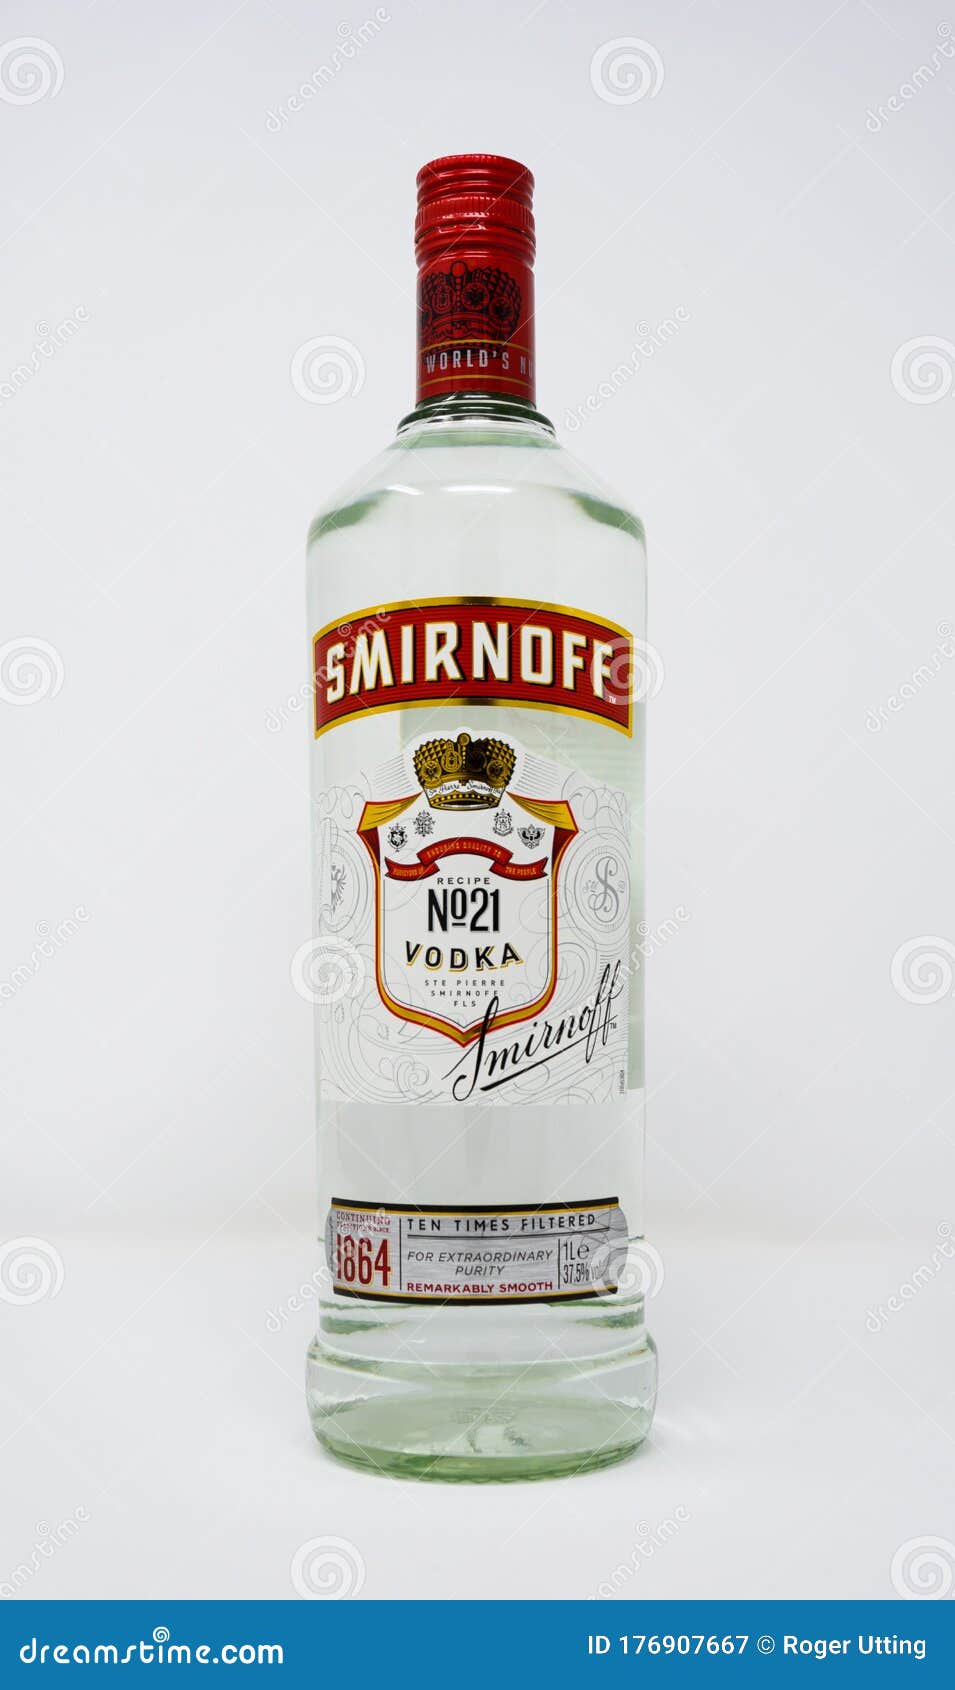 635 Smirnoff Photos Free Royalty Free Stock Photos From Dreamstime